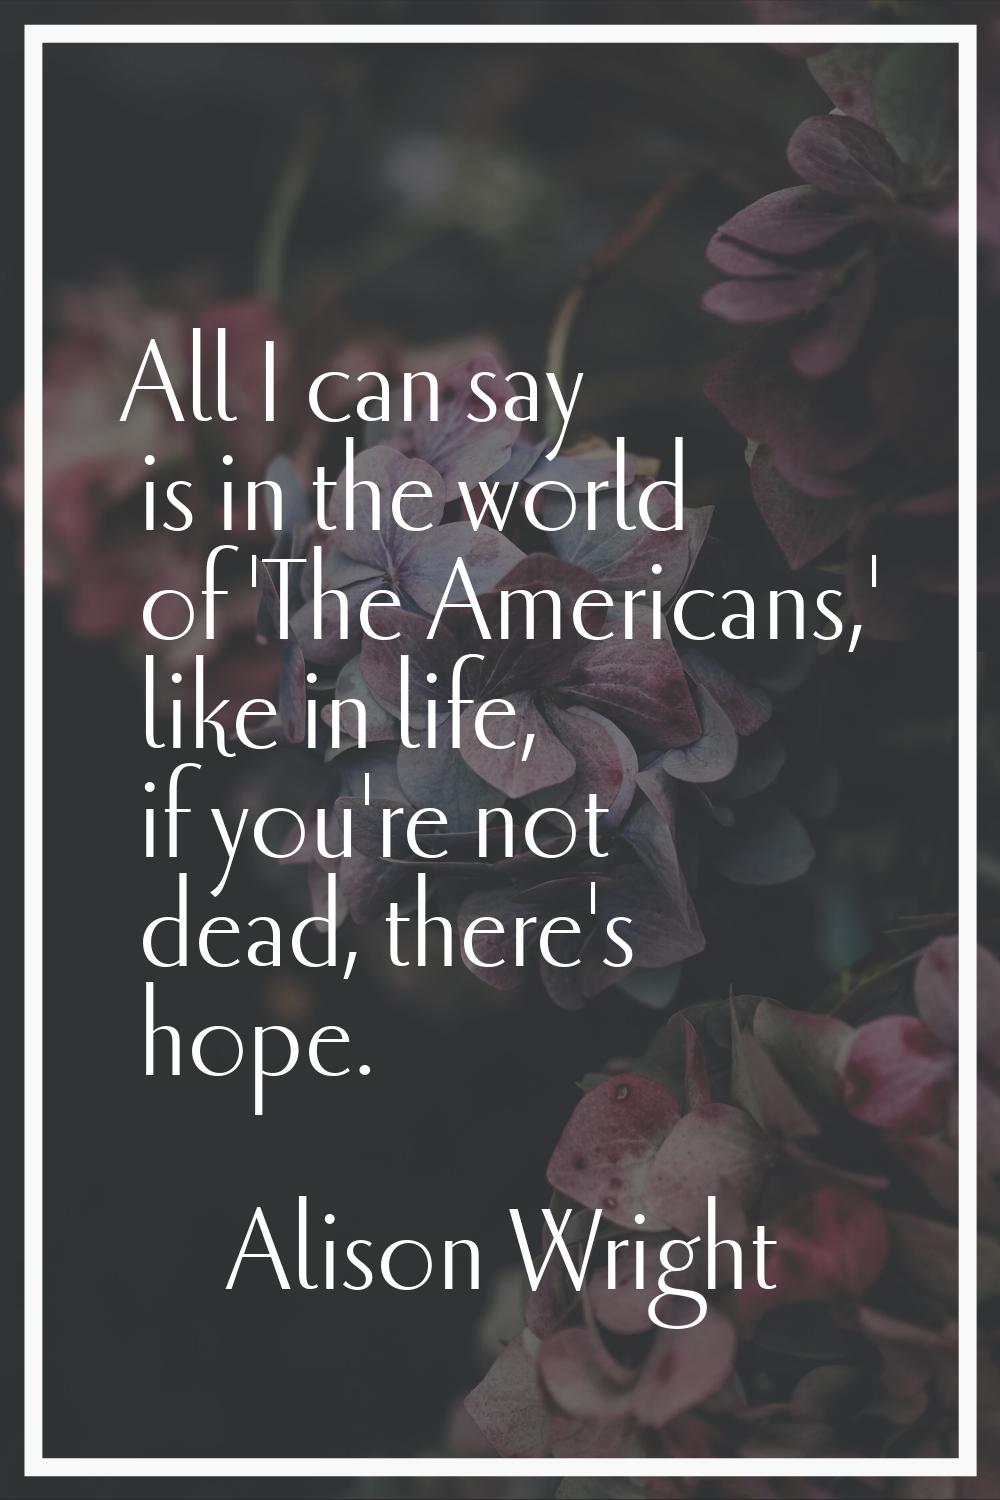 All I can say is in the world of 'The Americans,' like in life, if you're not dead, there's hope.